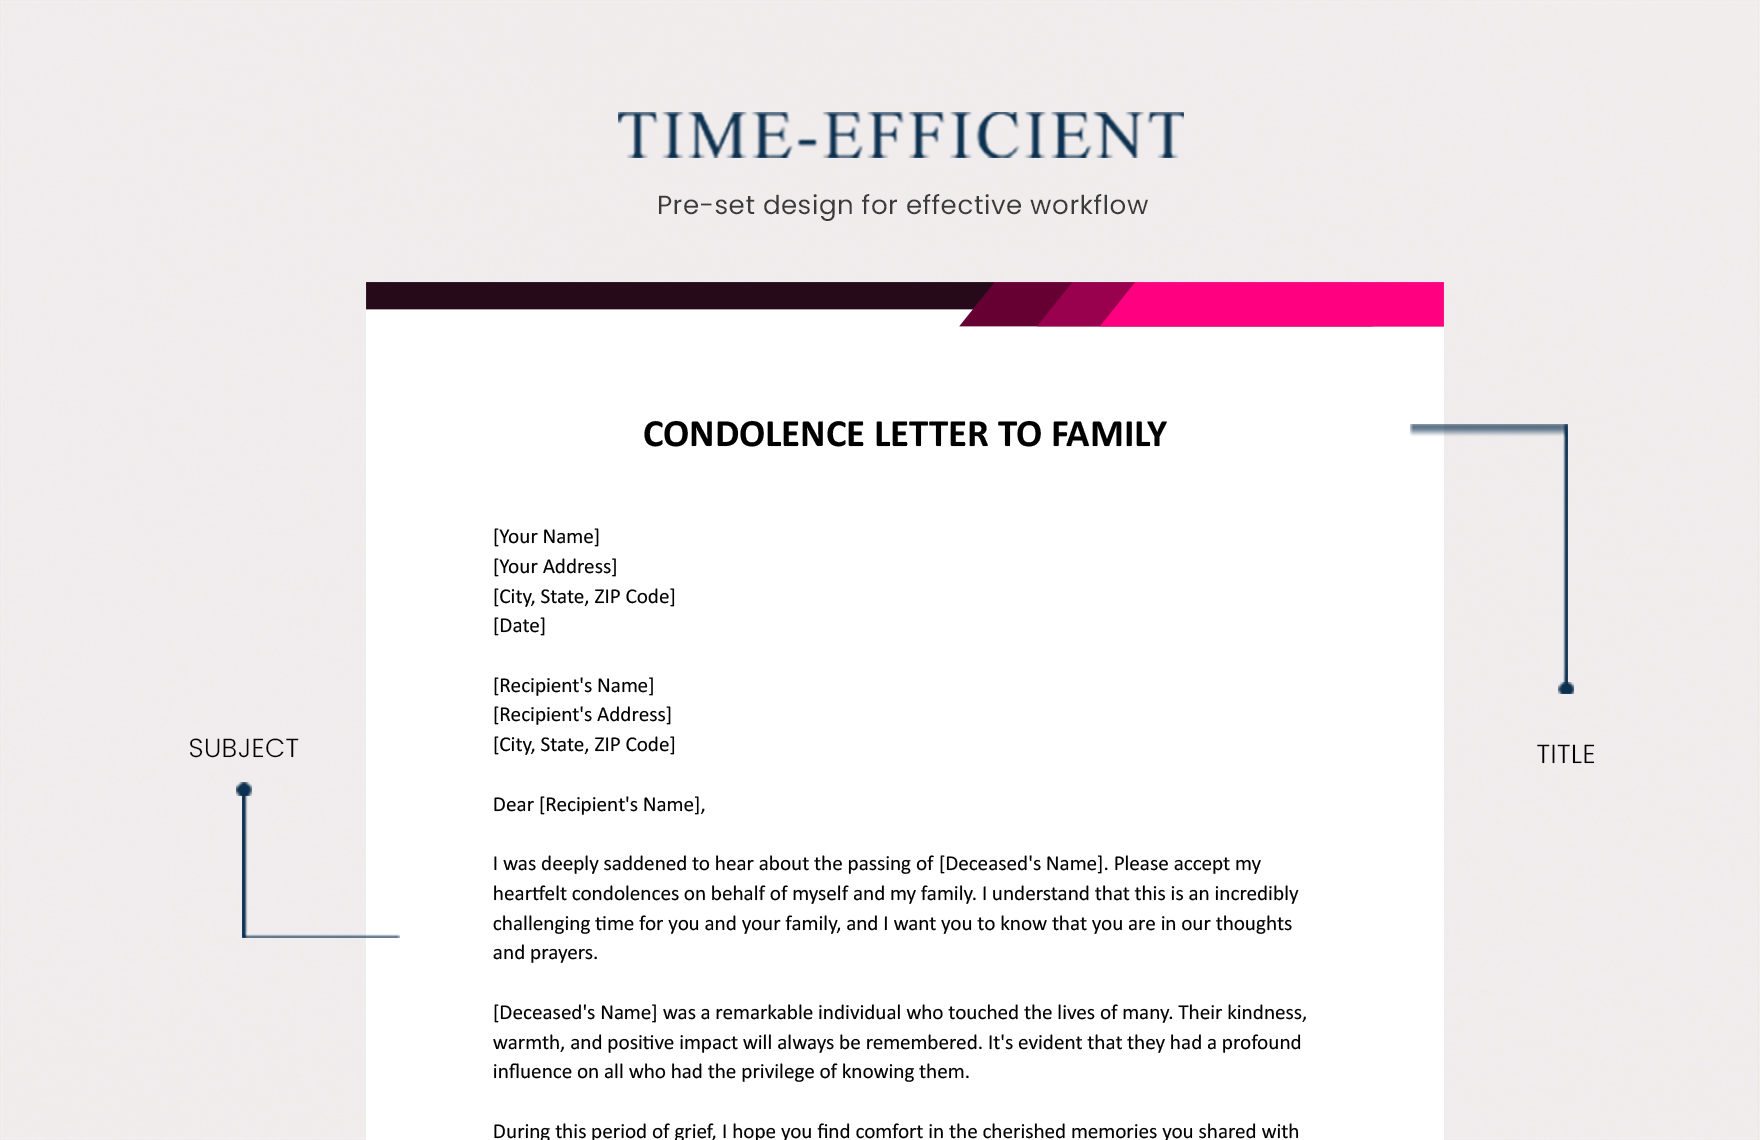 Condolence Letter To Family